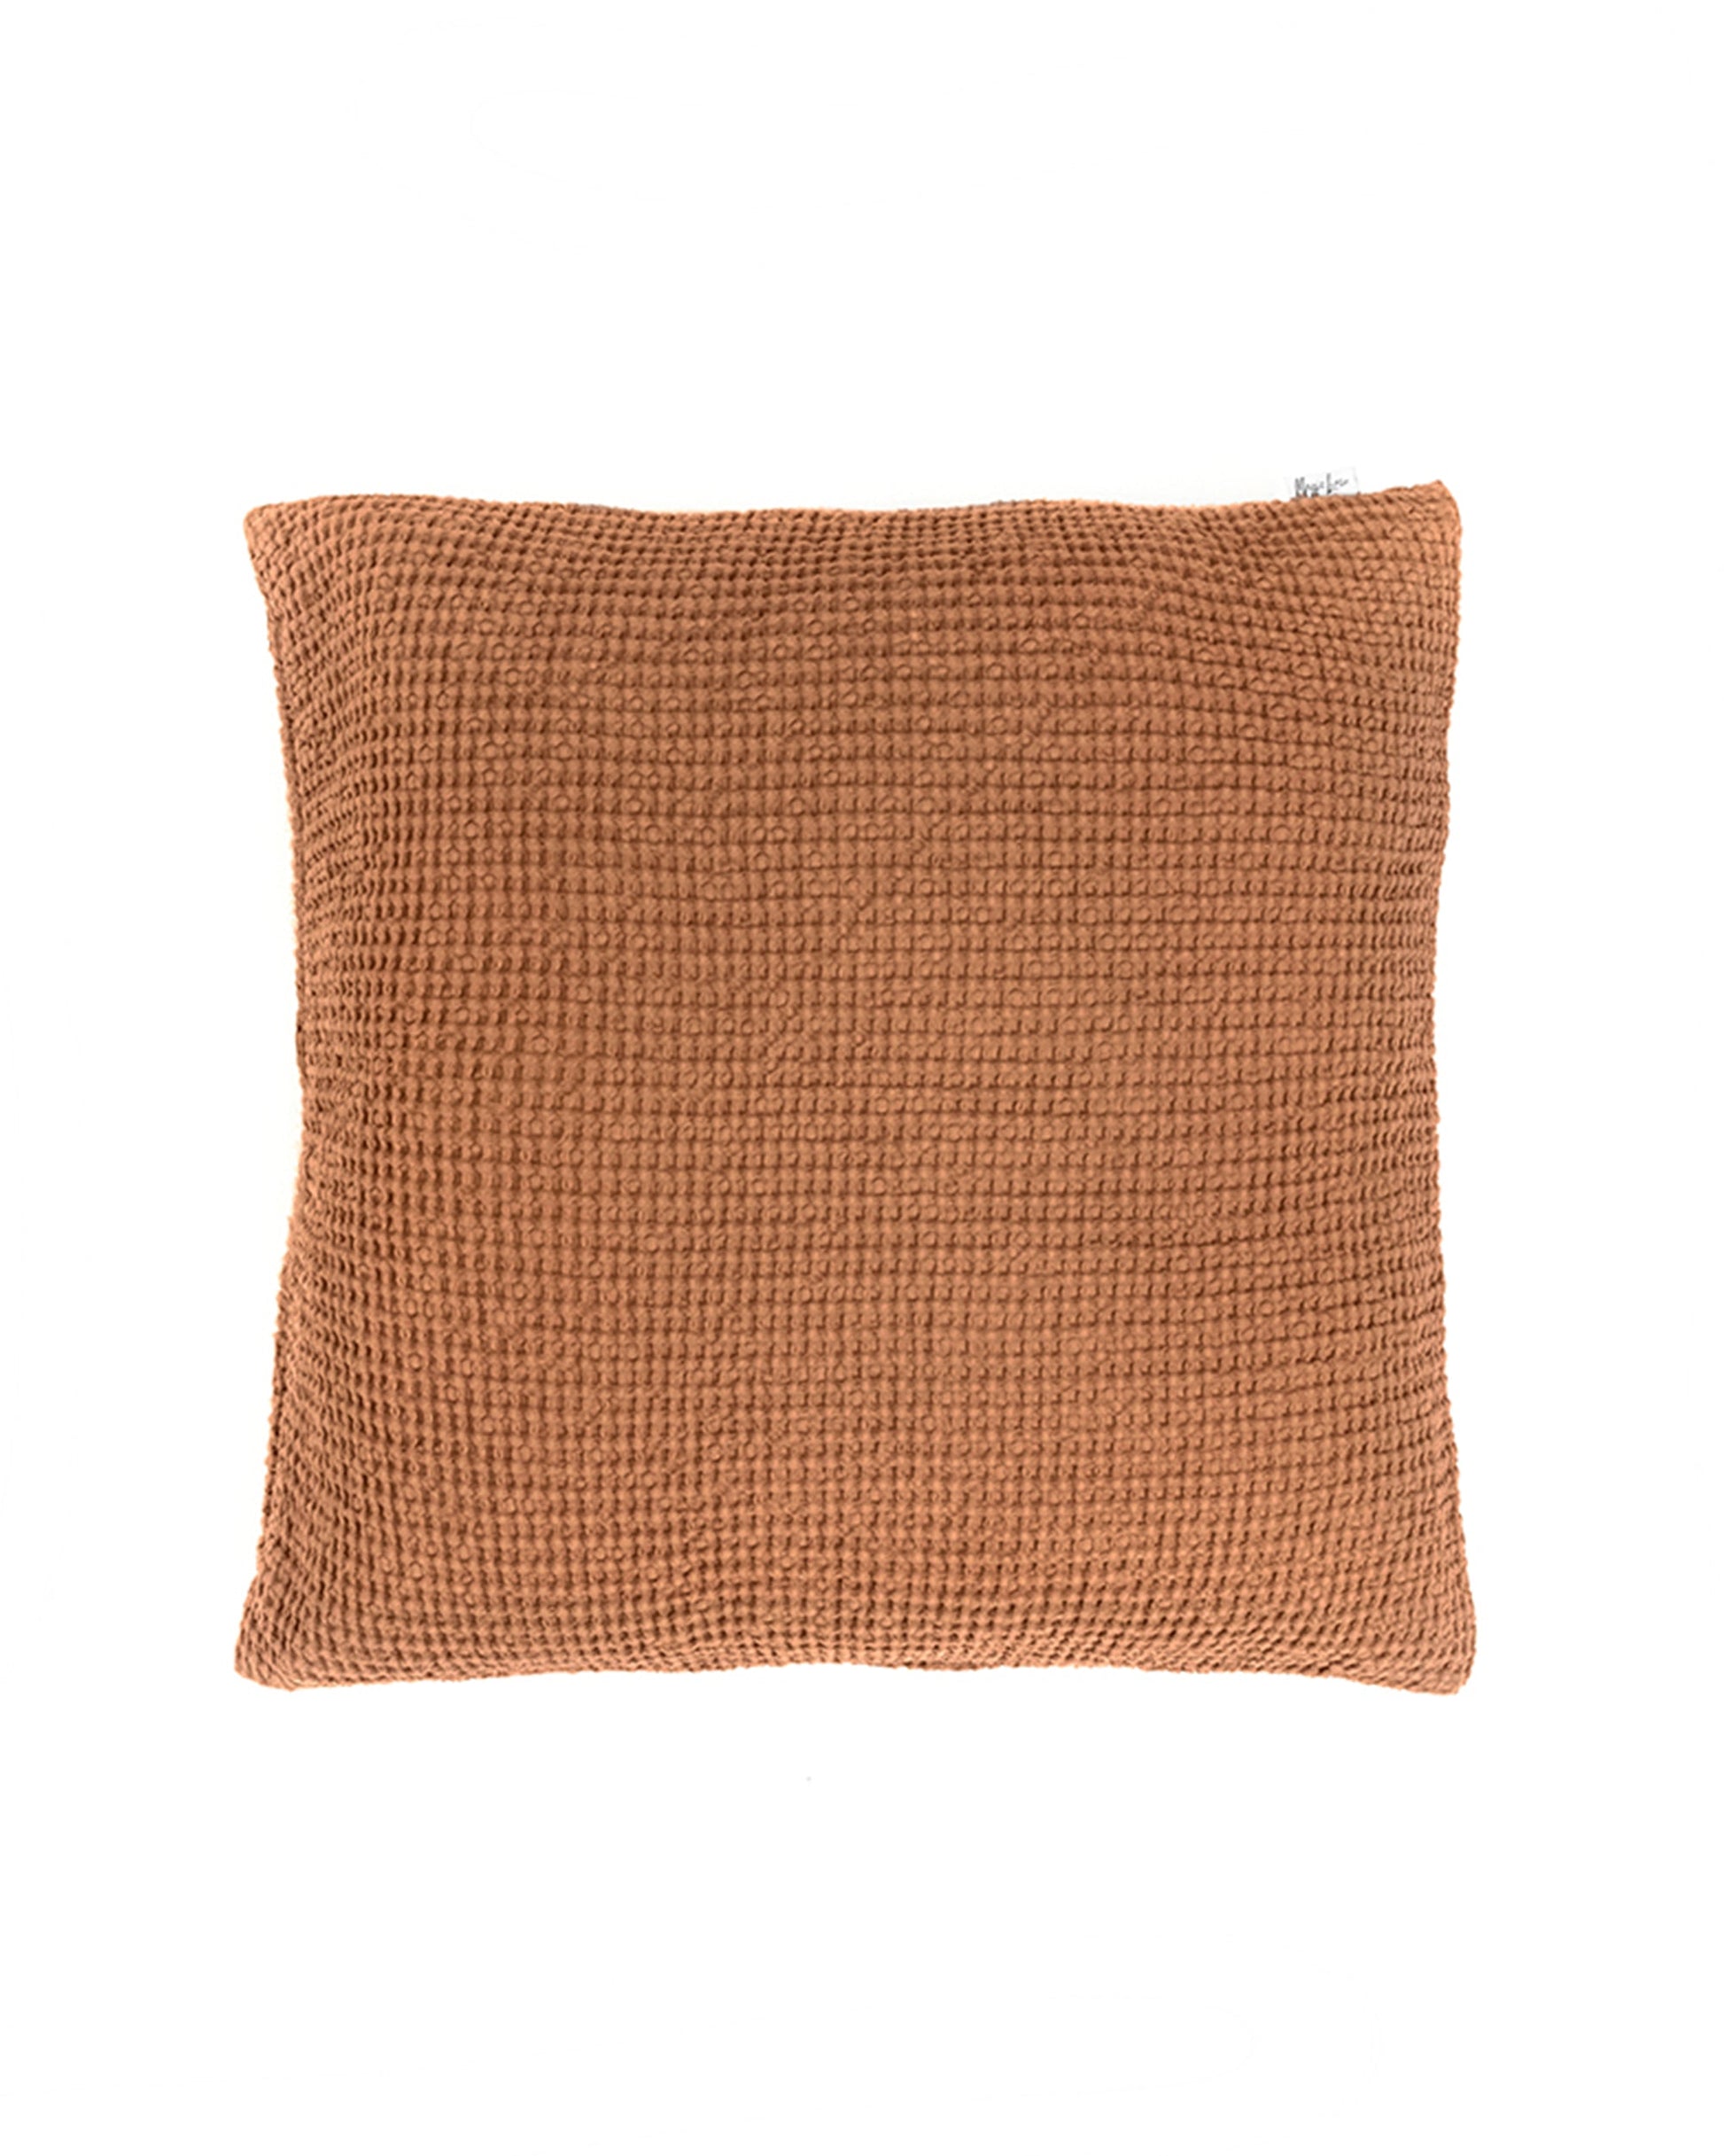 Waffle throw pillow cover in Cinnamon - MagicLinen